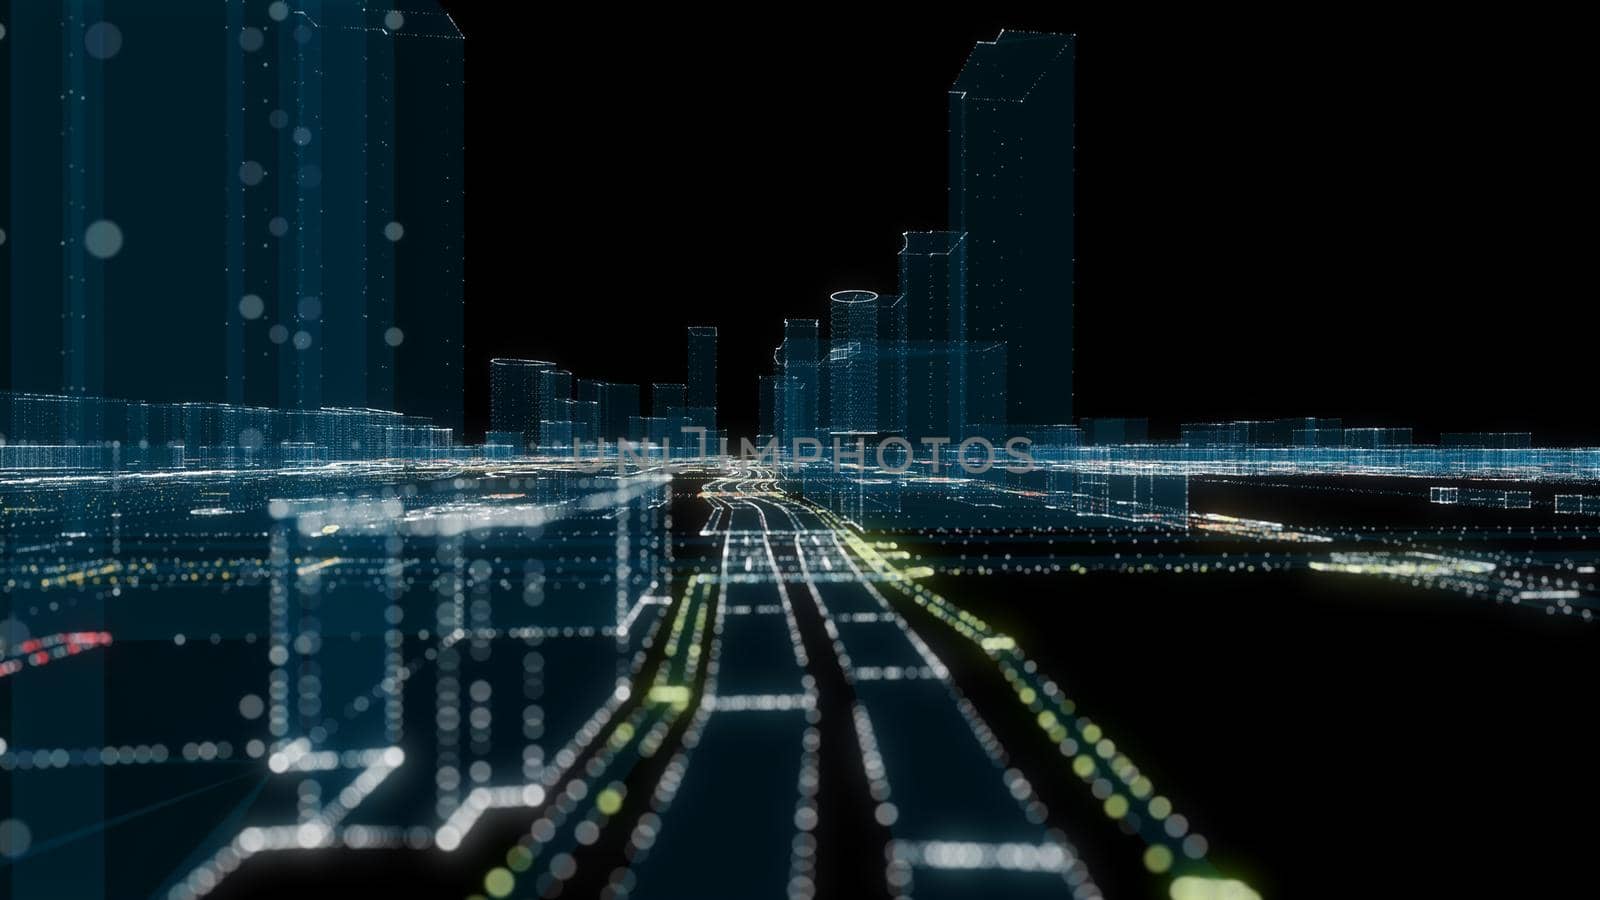 Futuristic Smart Digital City. Buildings and Roads. Smart City And Technology Business Concept. 3D Illustration